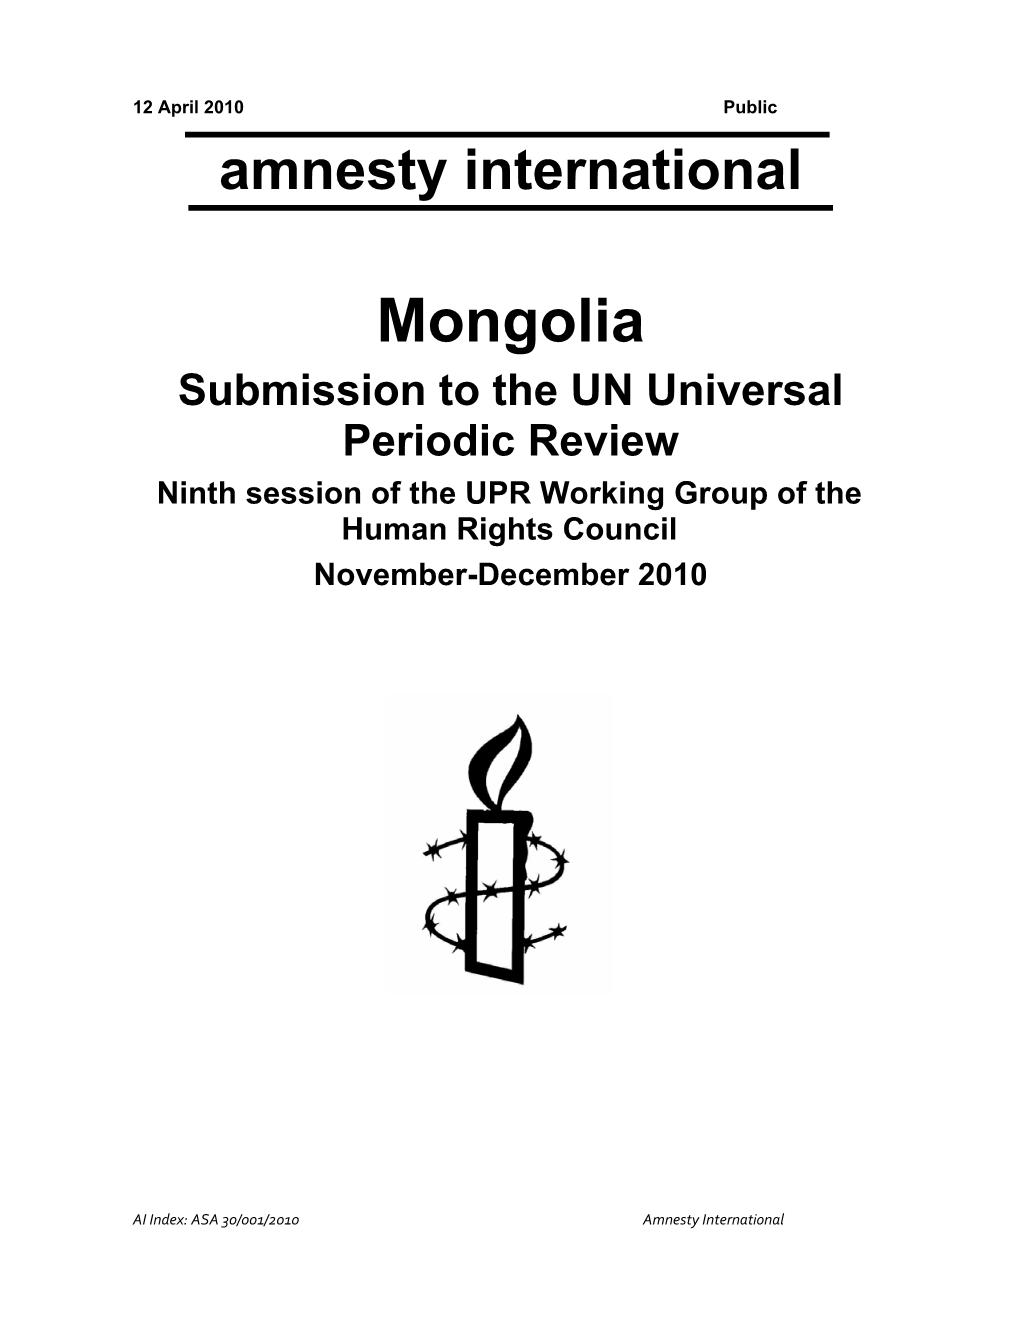 Mongolia Submission to the UN Universal Periodic Review Ninth Session of the UPR Working Group of the Human Rights Council November-December 2010